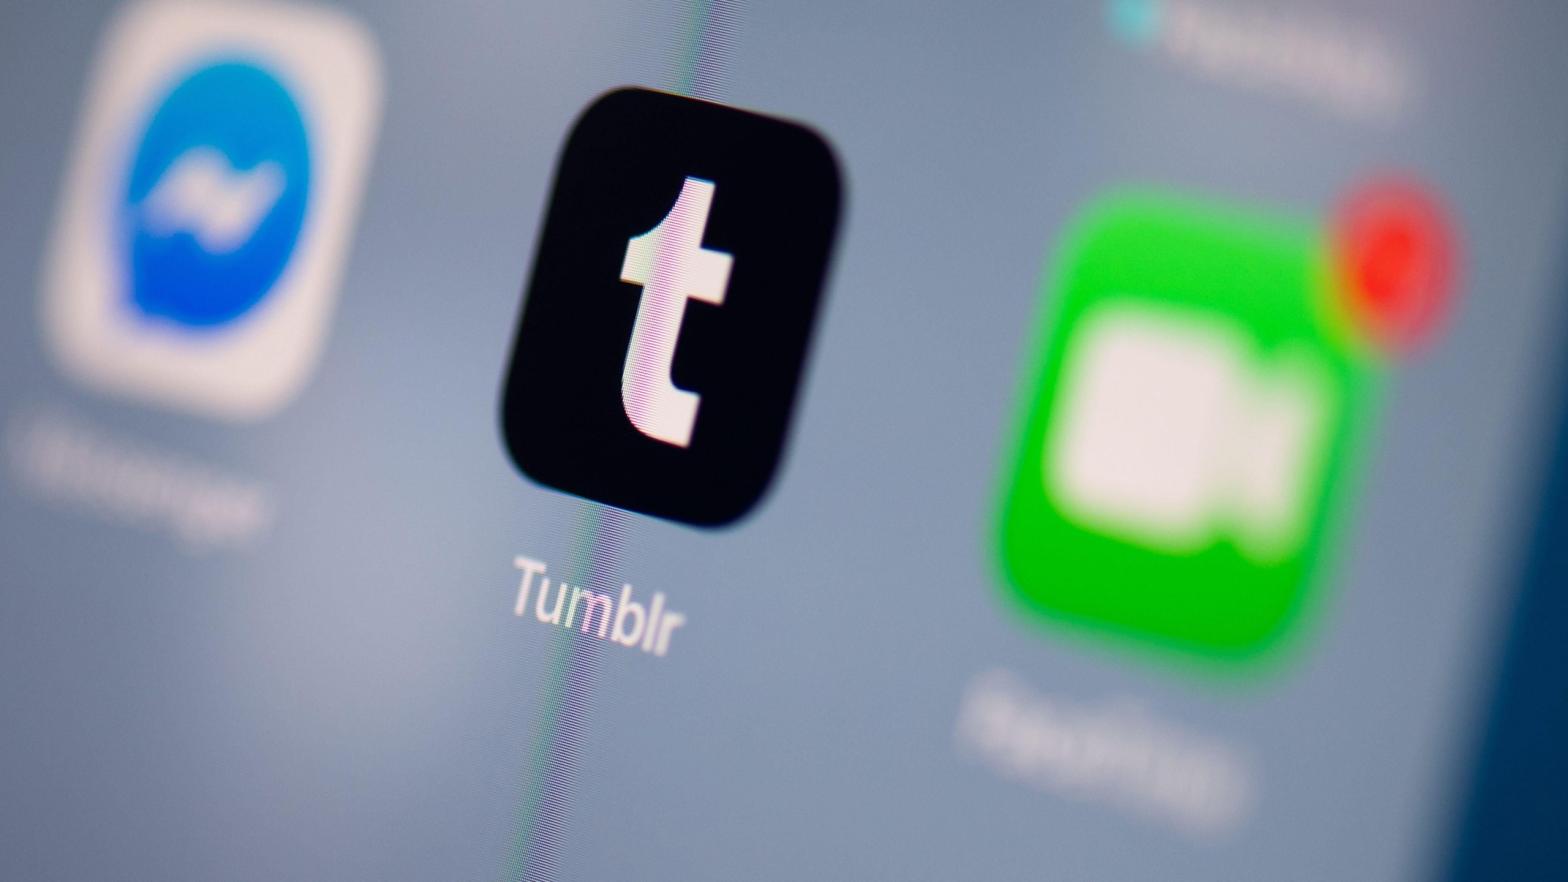 The Tumblr app logo shown on a tablet screen in July 2019. (Photo: Martin Bureau, Getty Images)